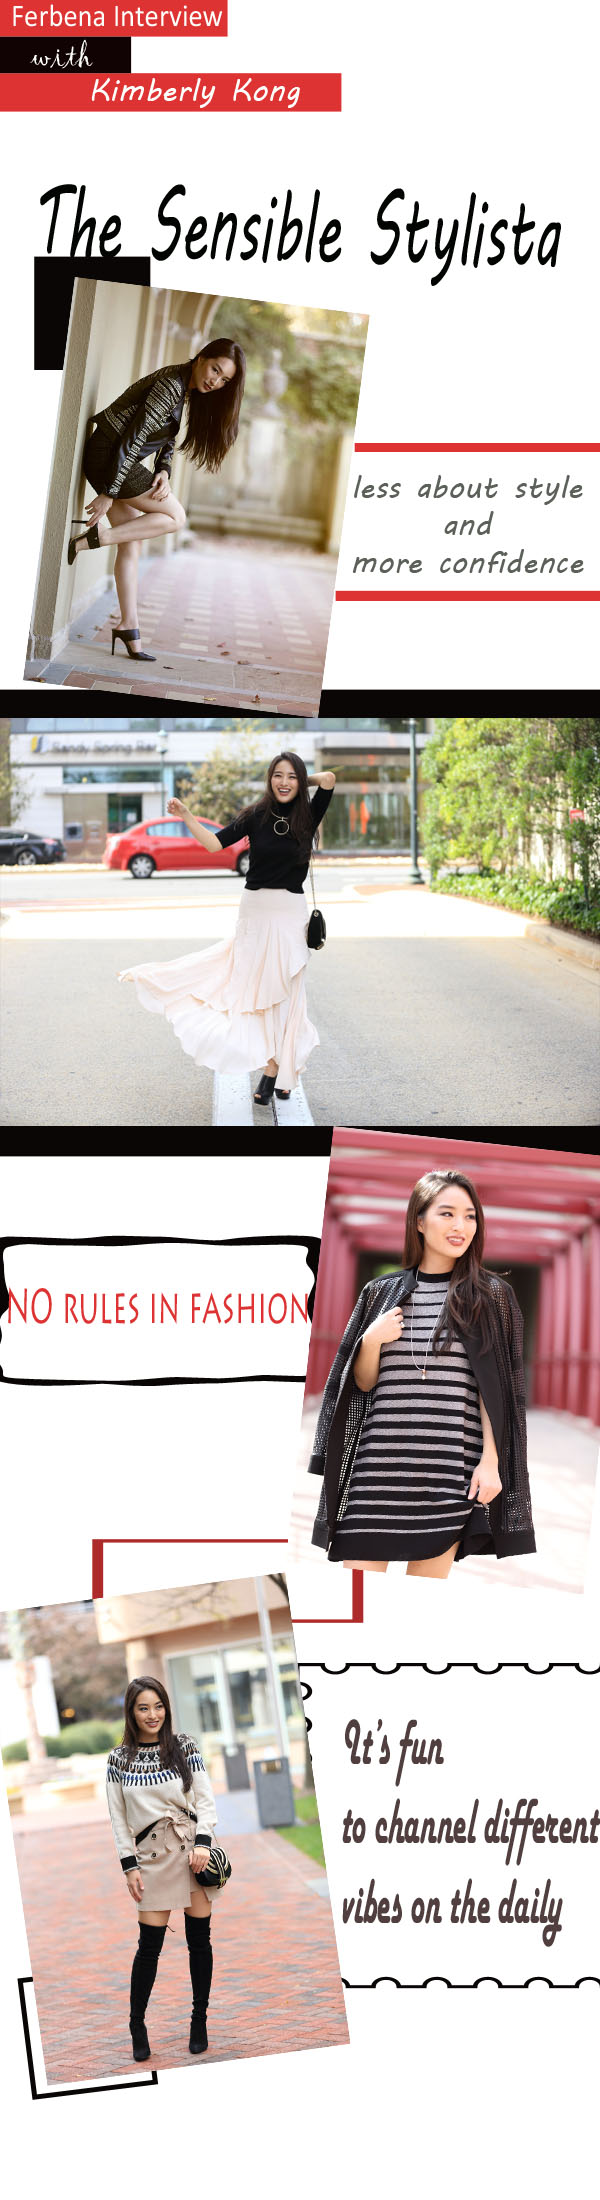 Interview with Kimberly Kong: The Sensible Stylista